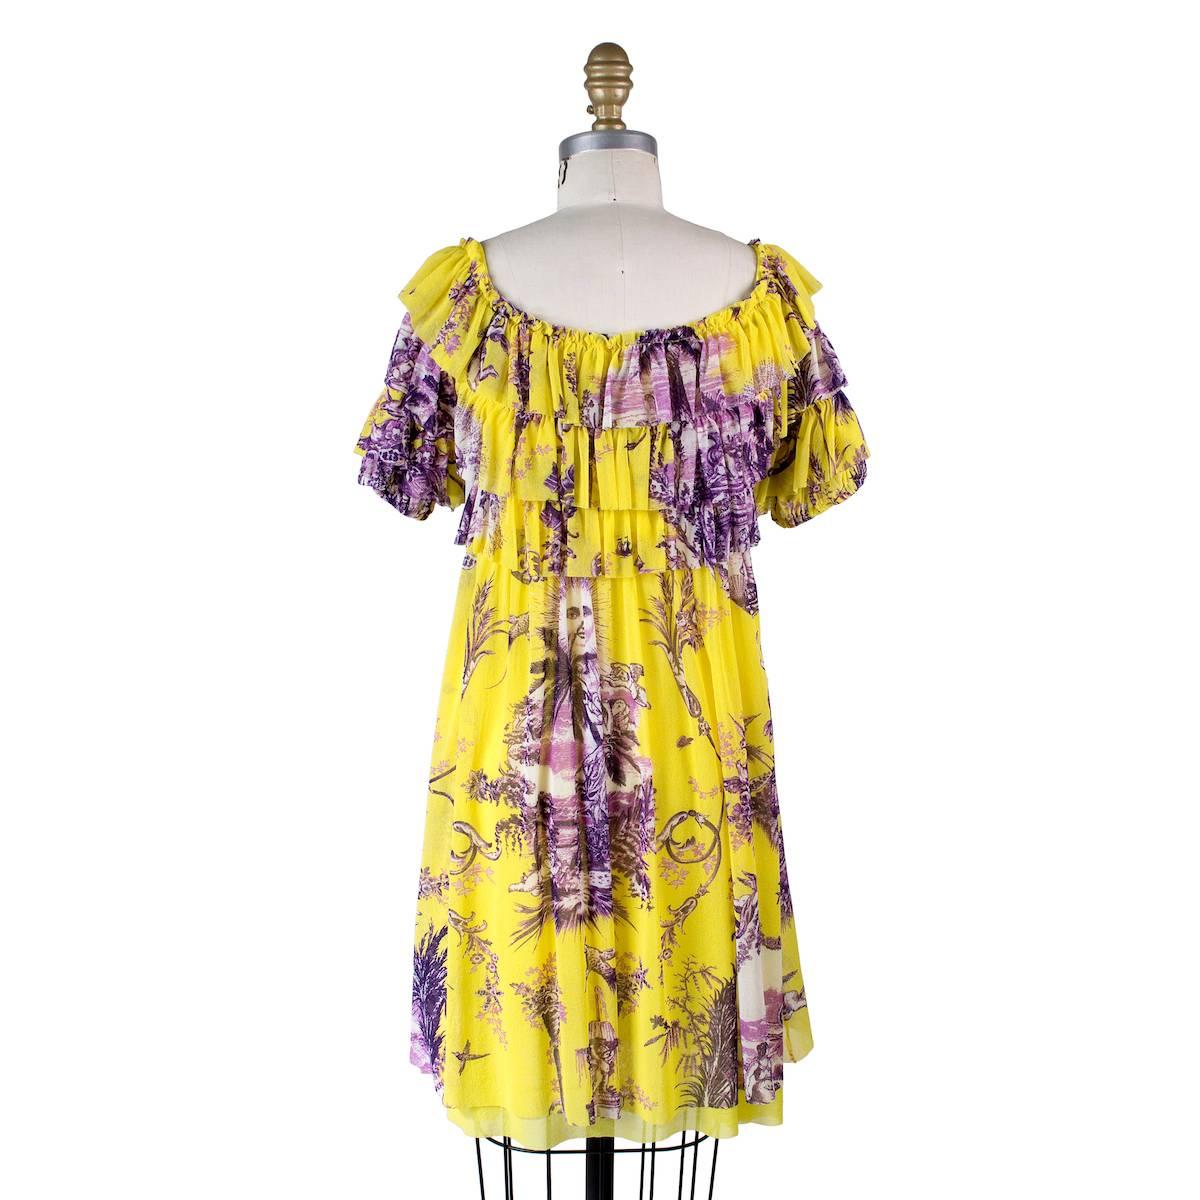 Top from Jean Paul Gaultier Soleil.  Features yellow and purple print with ruffles.  Empire waist.

100% Nylon/polyamide (has stretch)